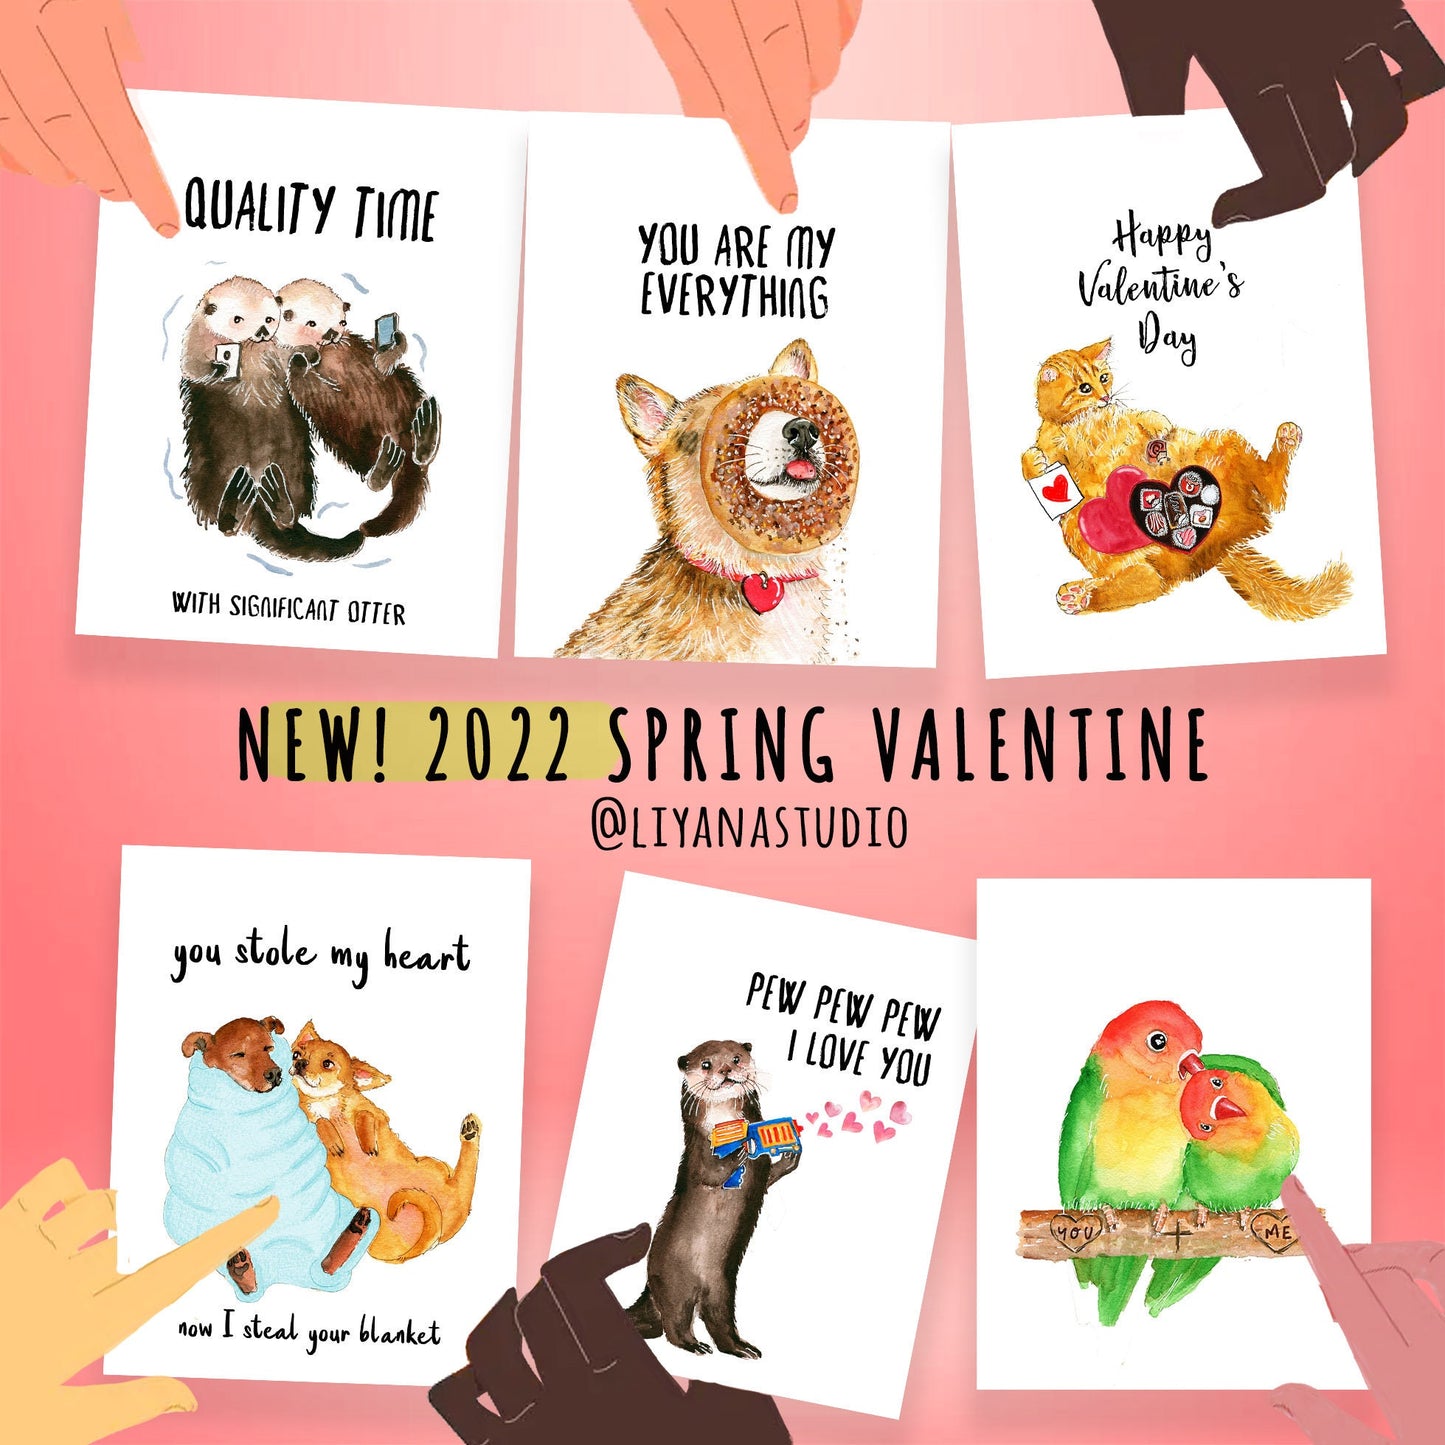 Funny Valentines Day Card For Boyfriend - Online Dating Card - Funny Anniversary Card For Boyfriend - It's A Match Swipe Right For You